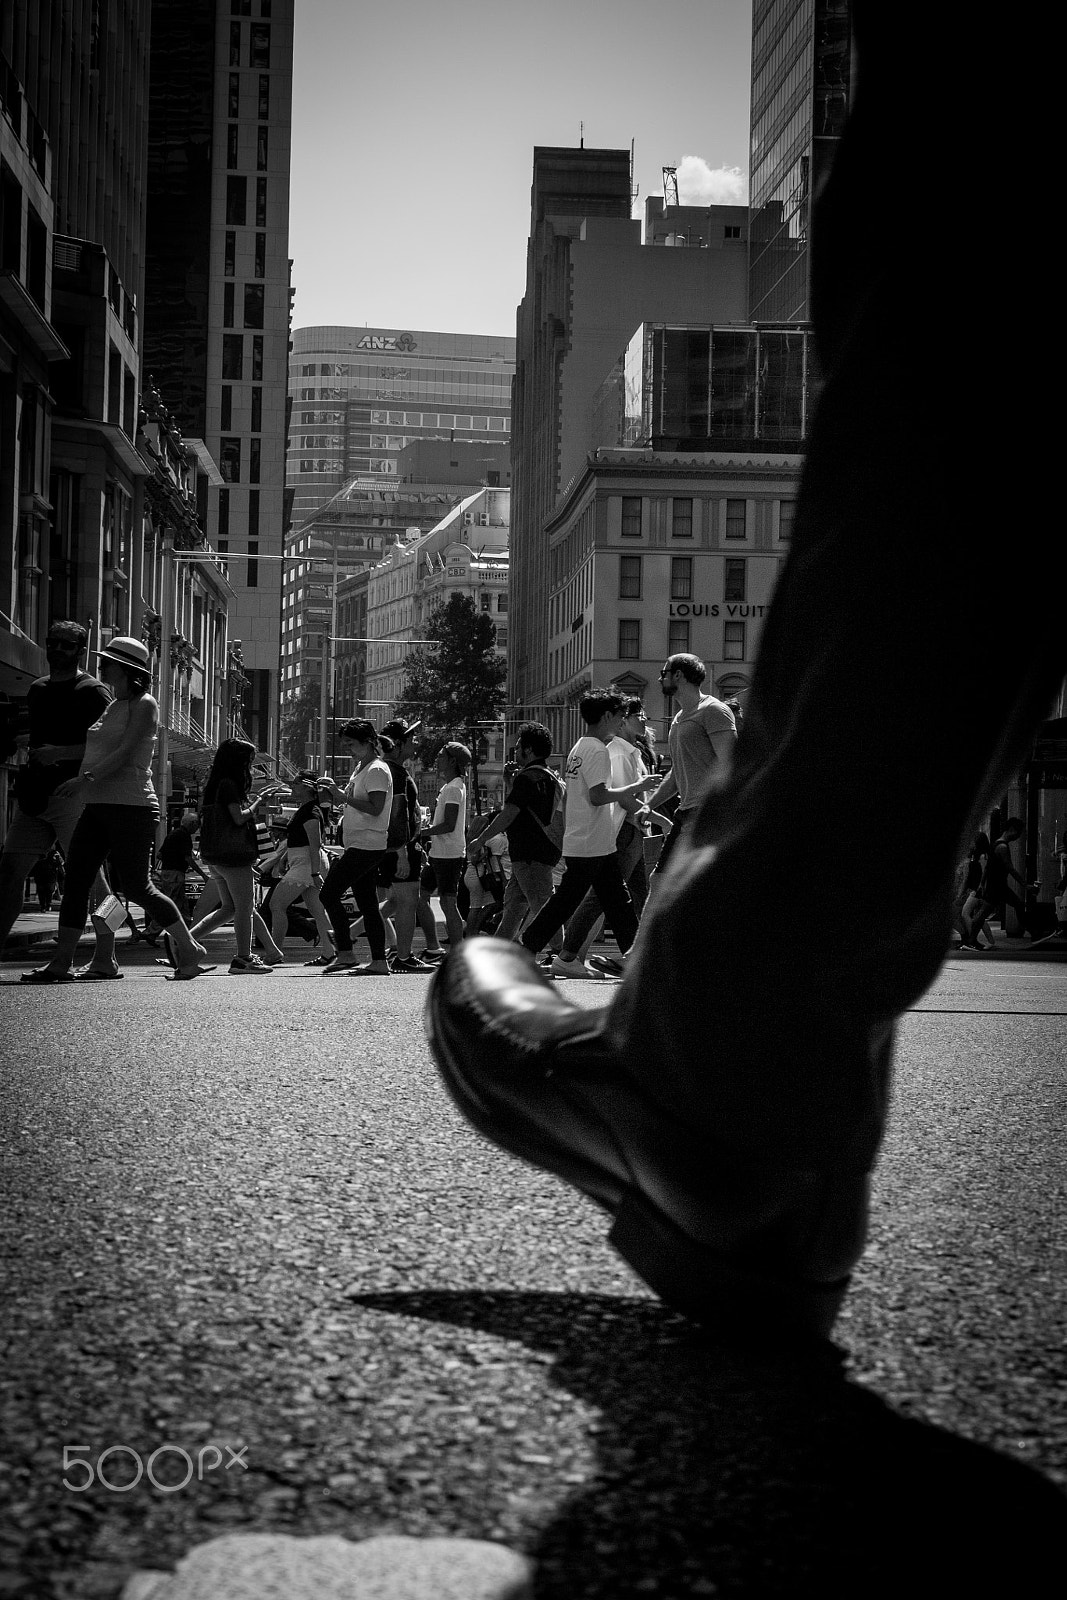 Canon EOS 70D + Sigma 24-105mm f/4 DG OS HSM | A sample photo. Shoe and street. photography